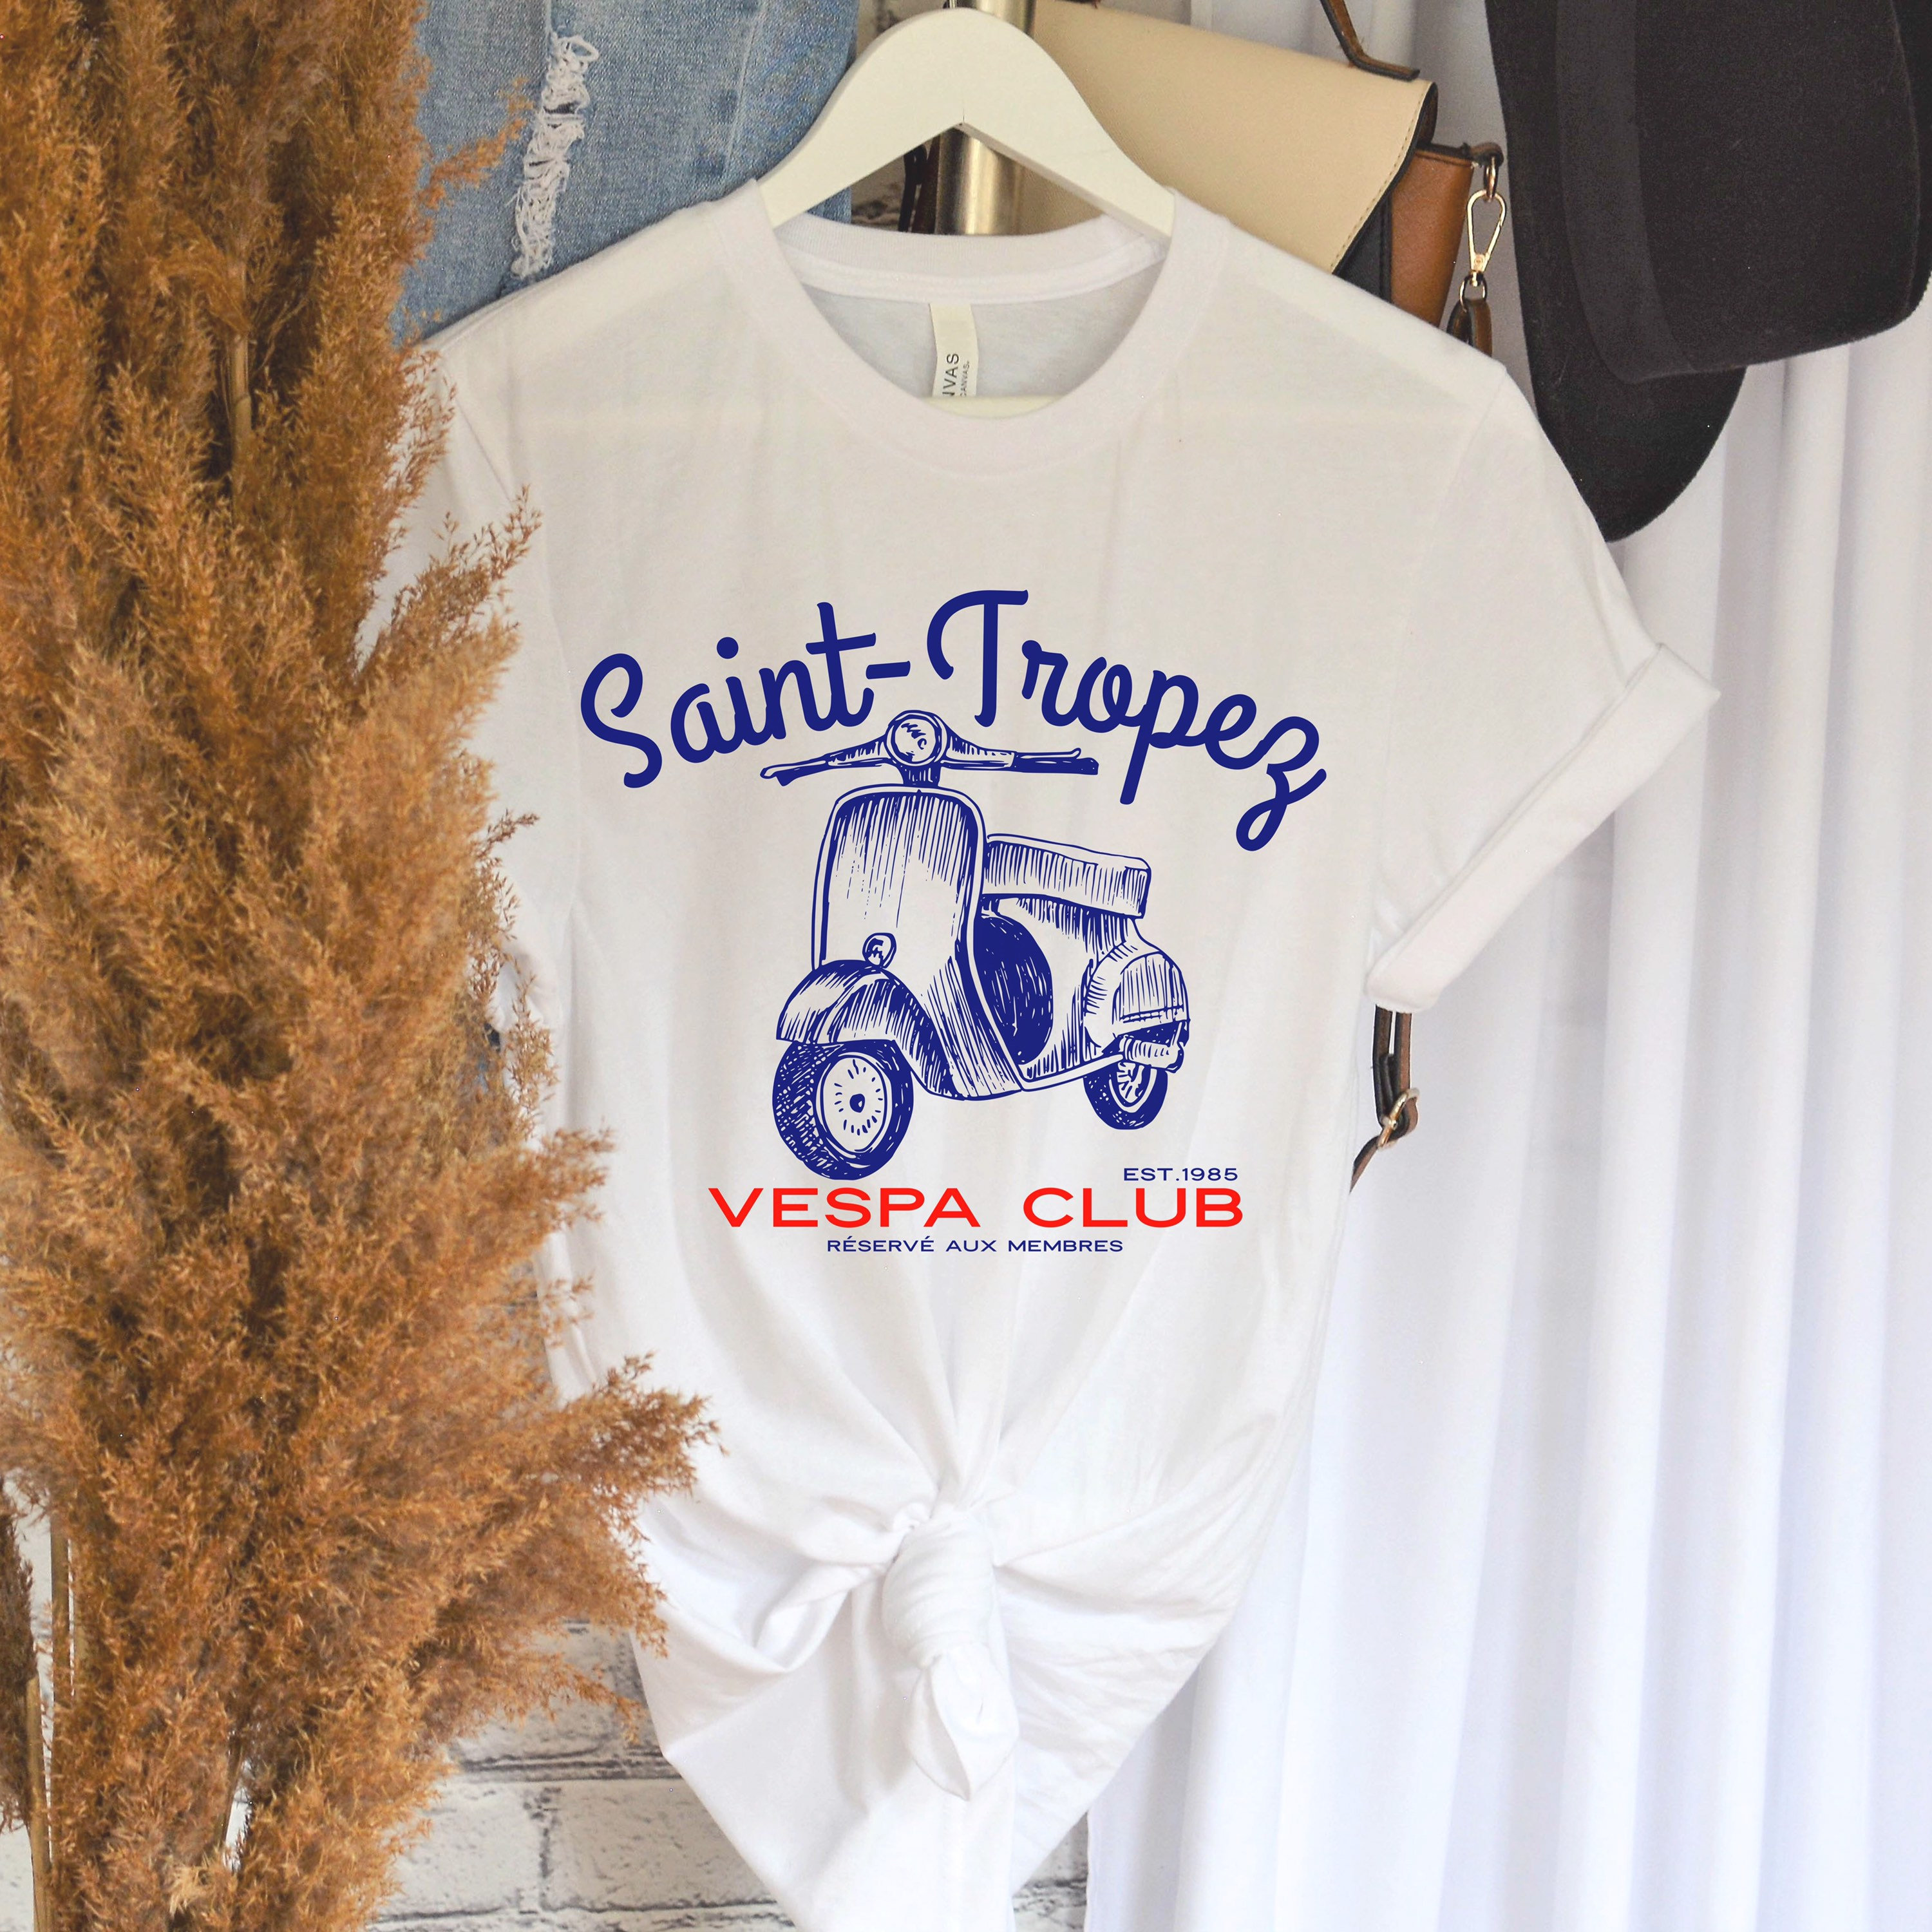 ST TROPEZ 70'S T-SHIRT IN COTTON JERSEY - WHITE/RED/BLUE